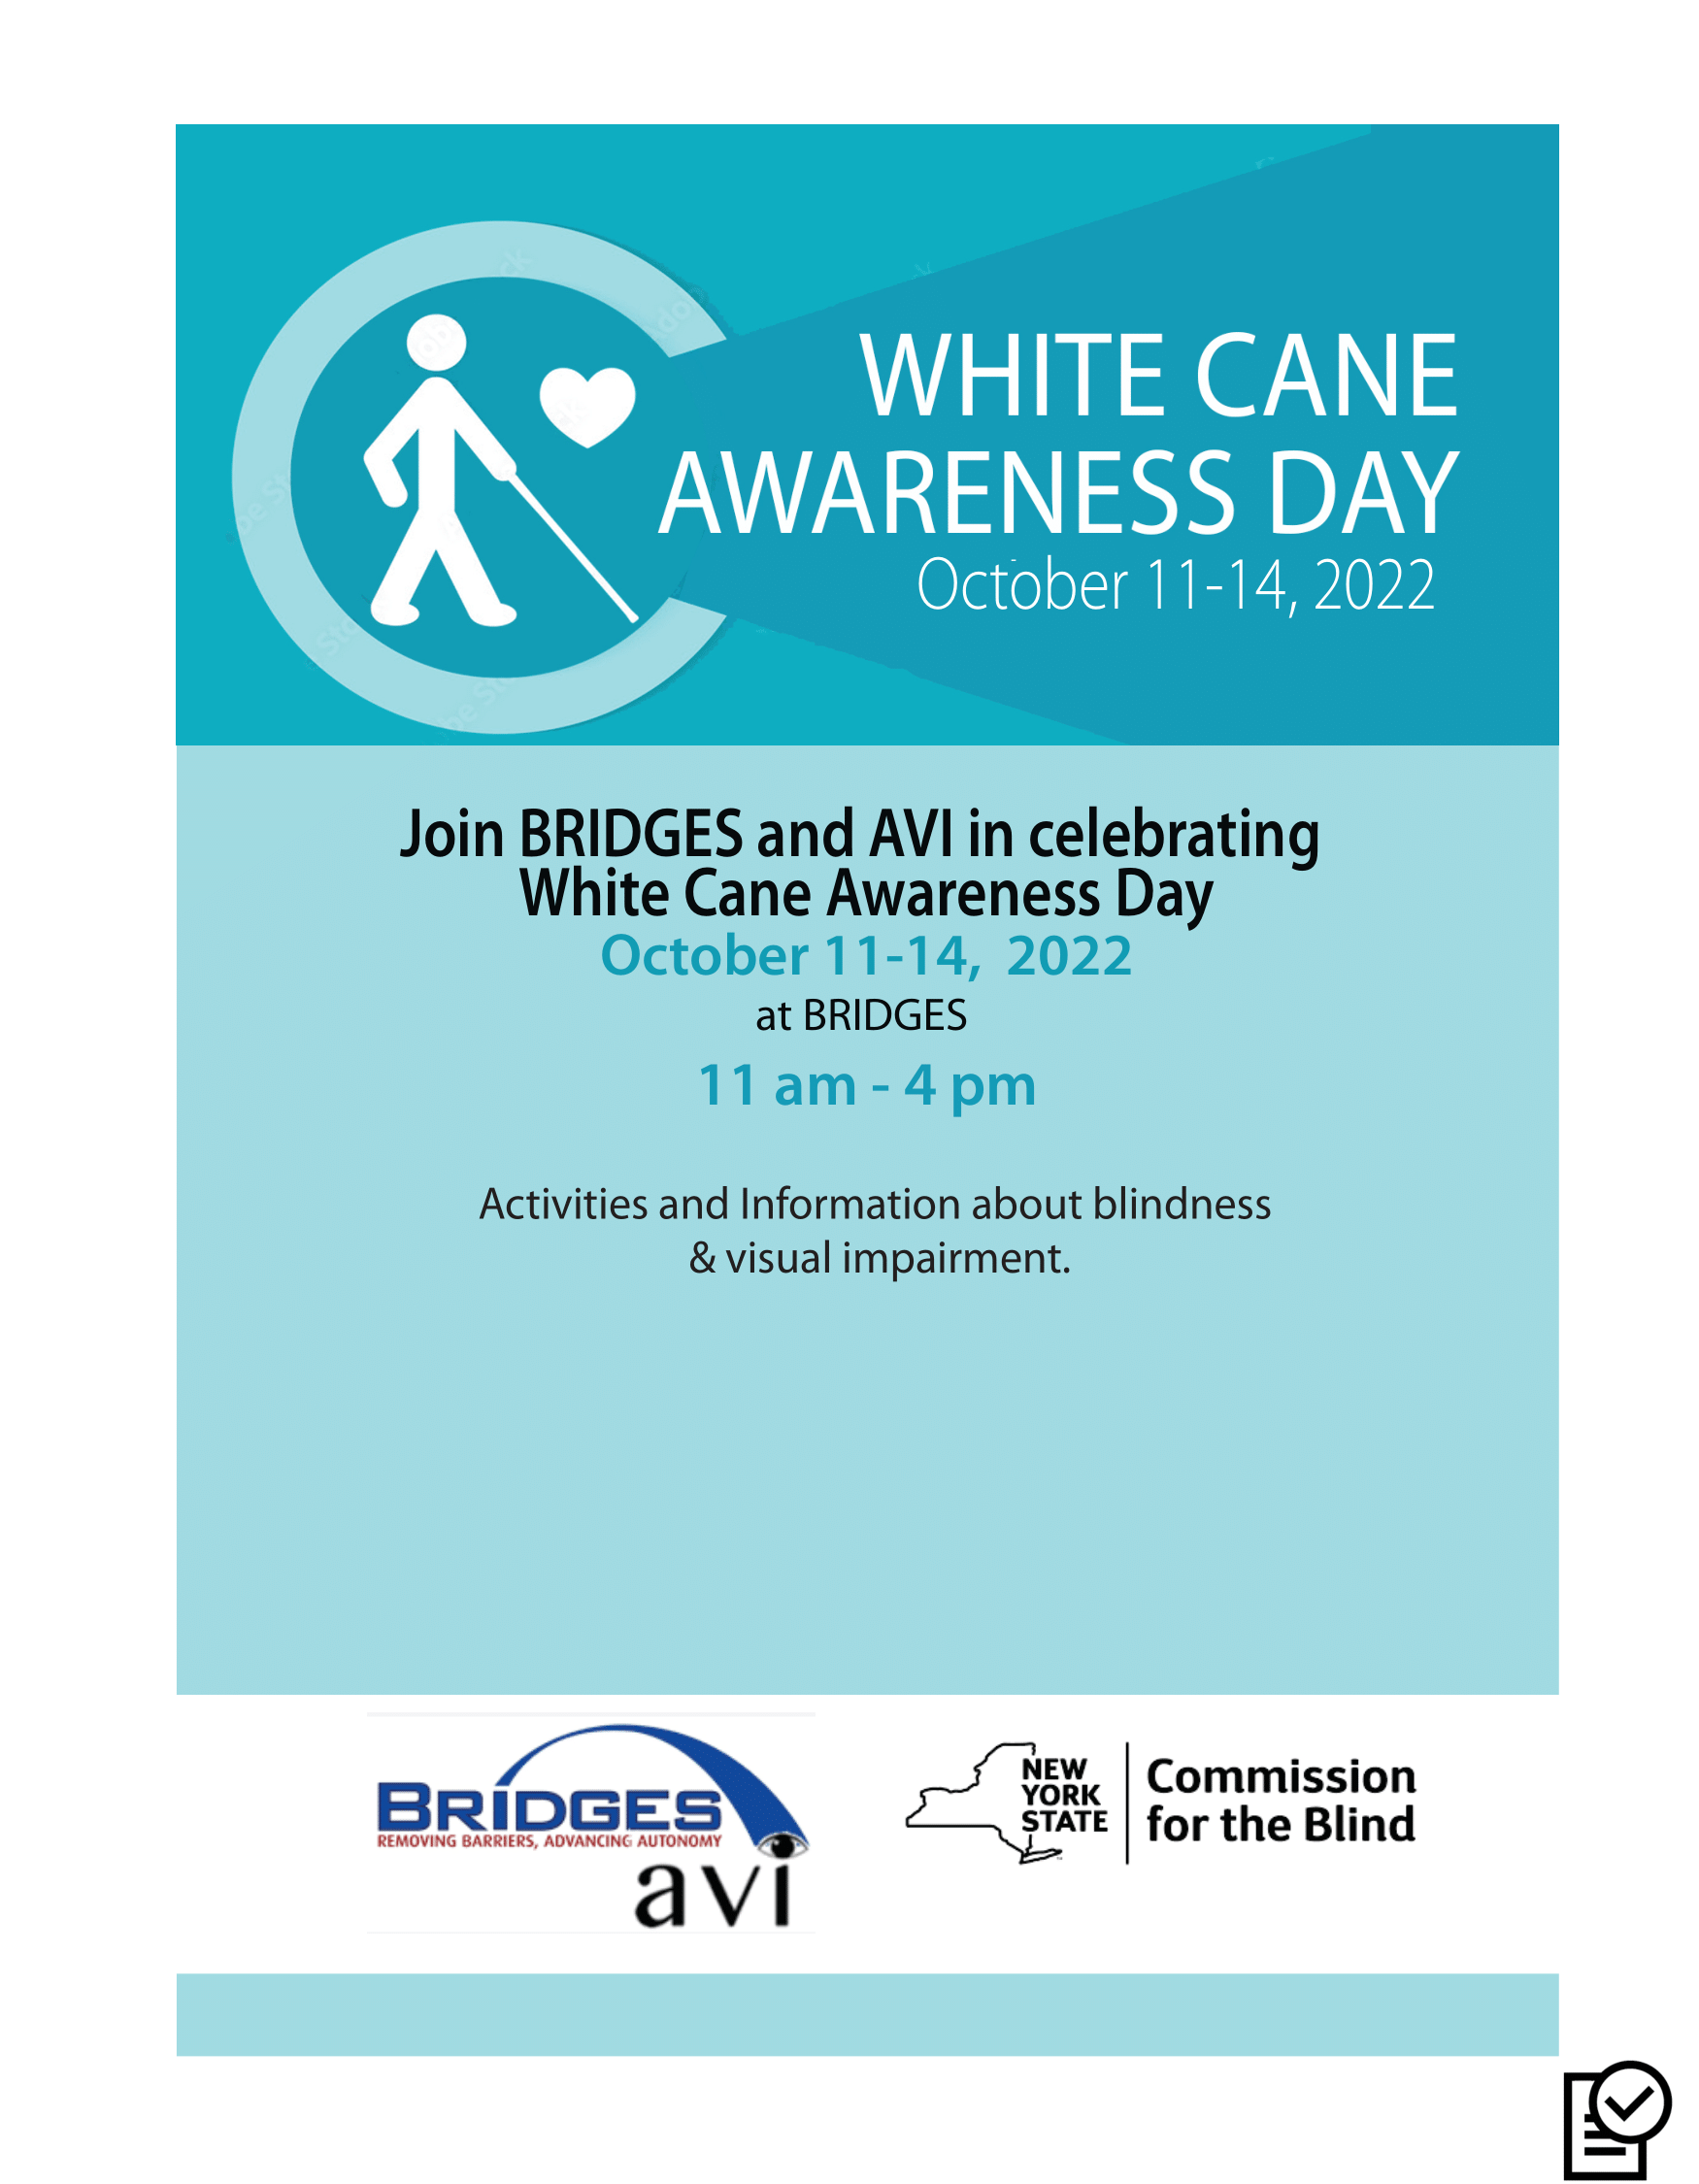 White Cane Awareness Day, October 11 to 14, 2022. Join Bridges and AVI in celebrating White Cane Awareness Day at BRIDGES. 11 am to 4 pm. Activities and information about blindness and visual impairment. BRIDGES AVI logo and New York State Commission for the Blind logo.